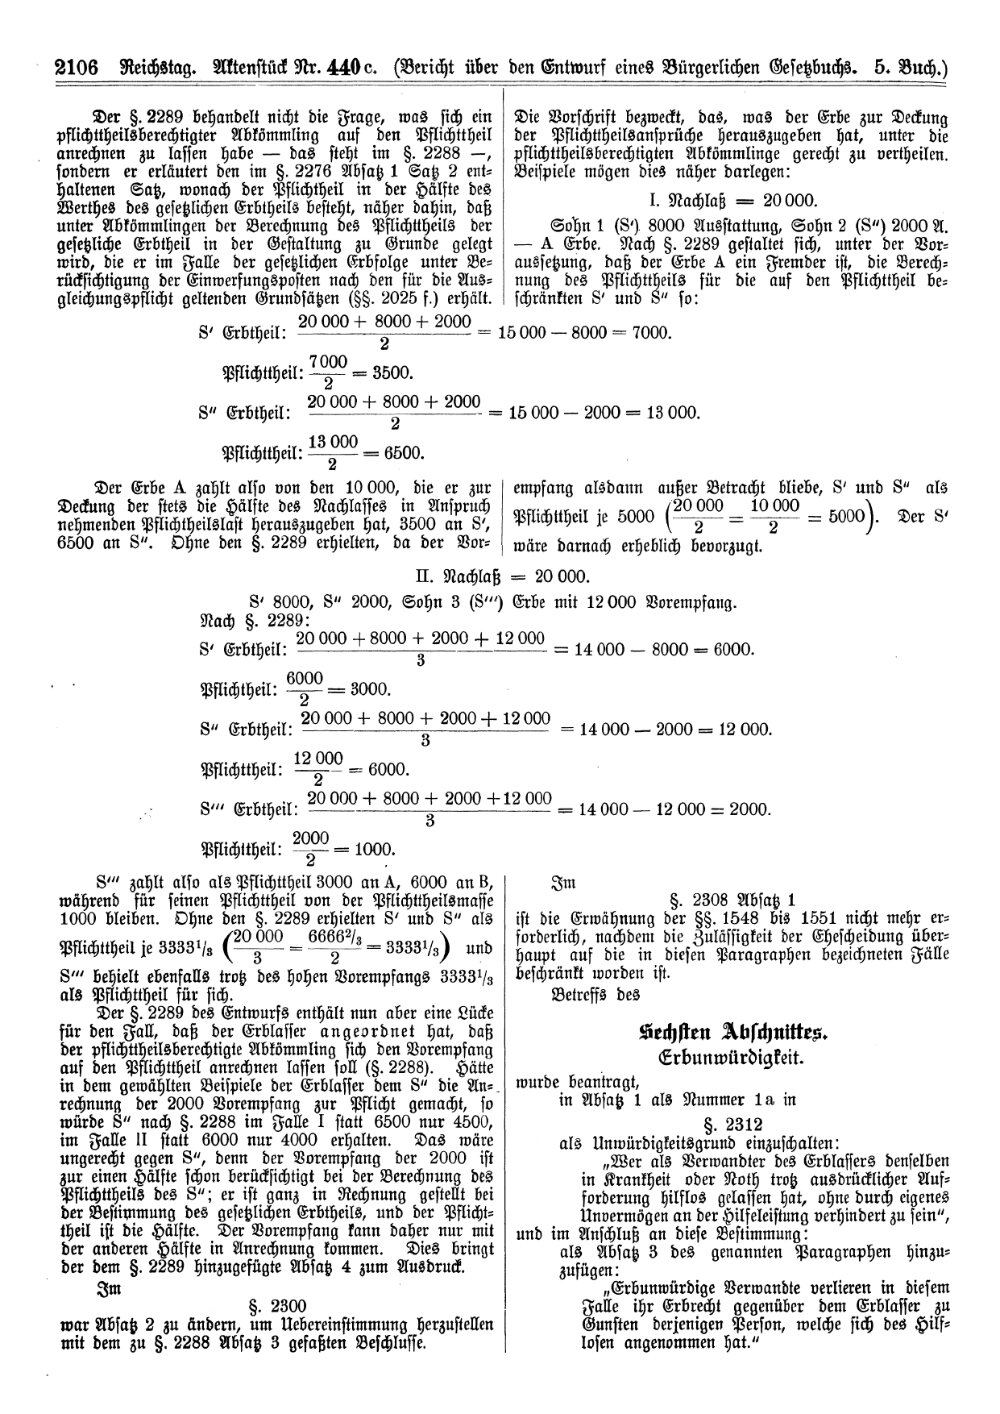 Scan of page 2106